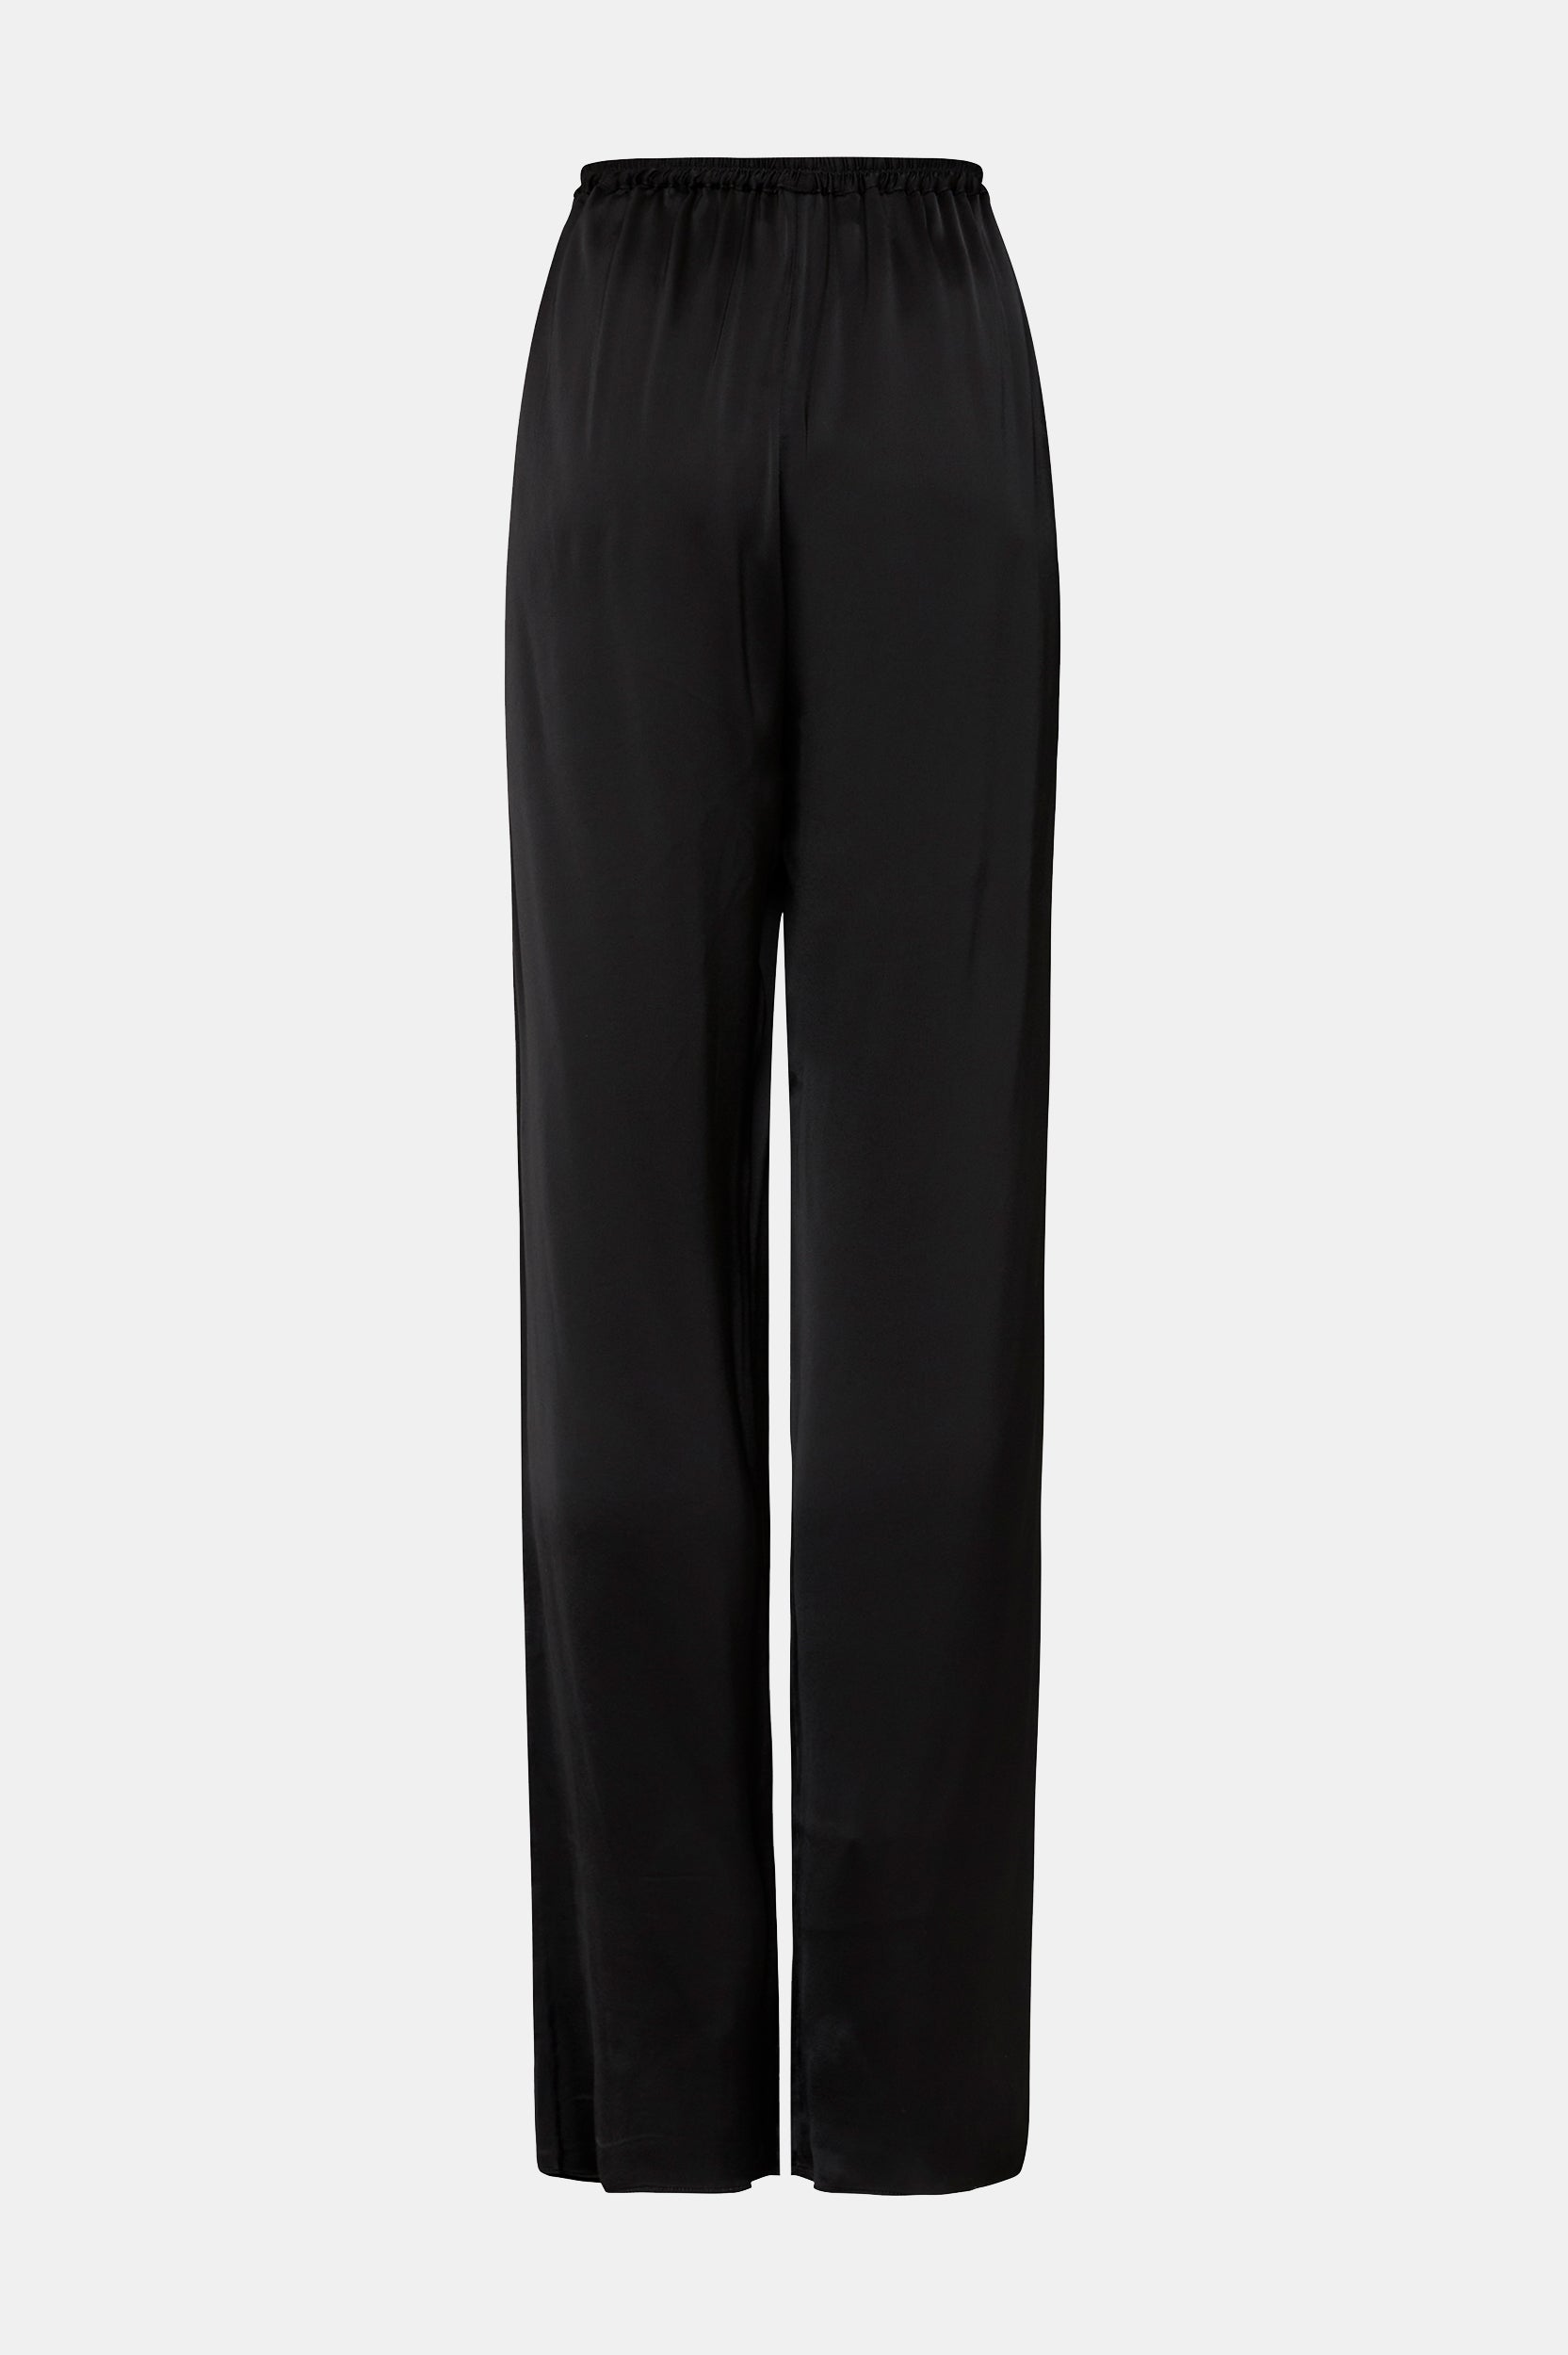 Relaxed Satin Pant in Black